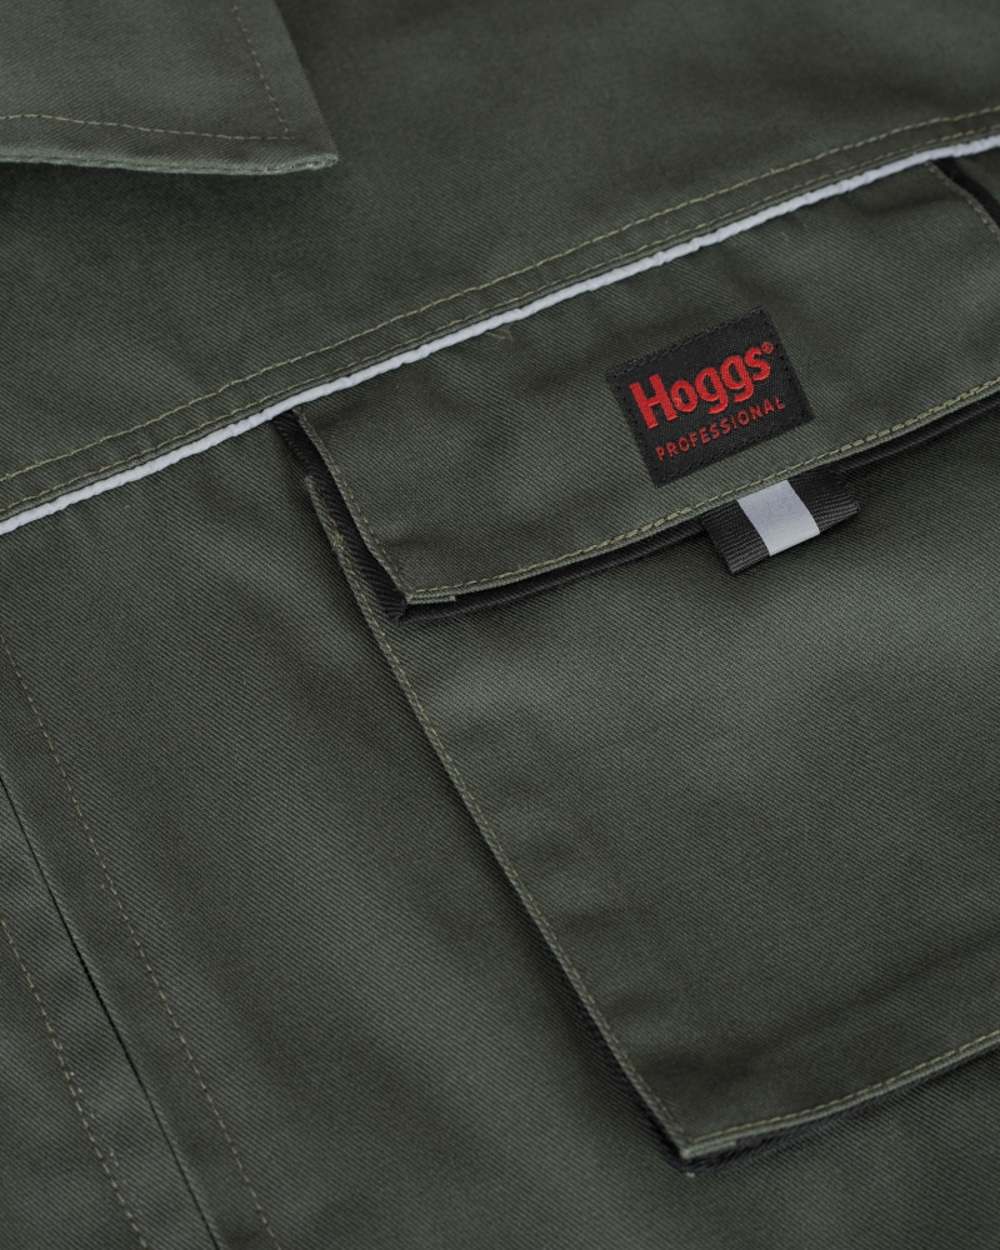 Hoggs of Fife Workhogg Zipped Cotton Coverall